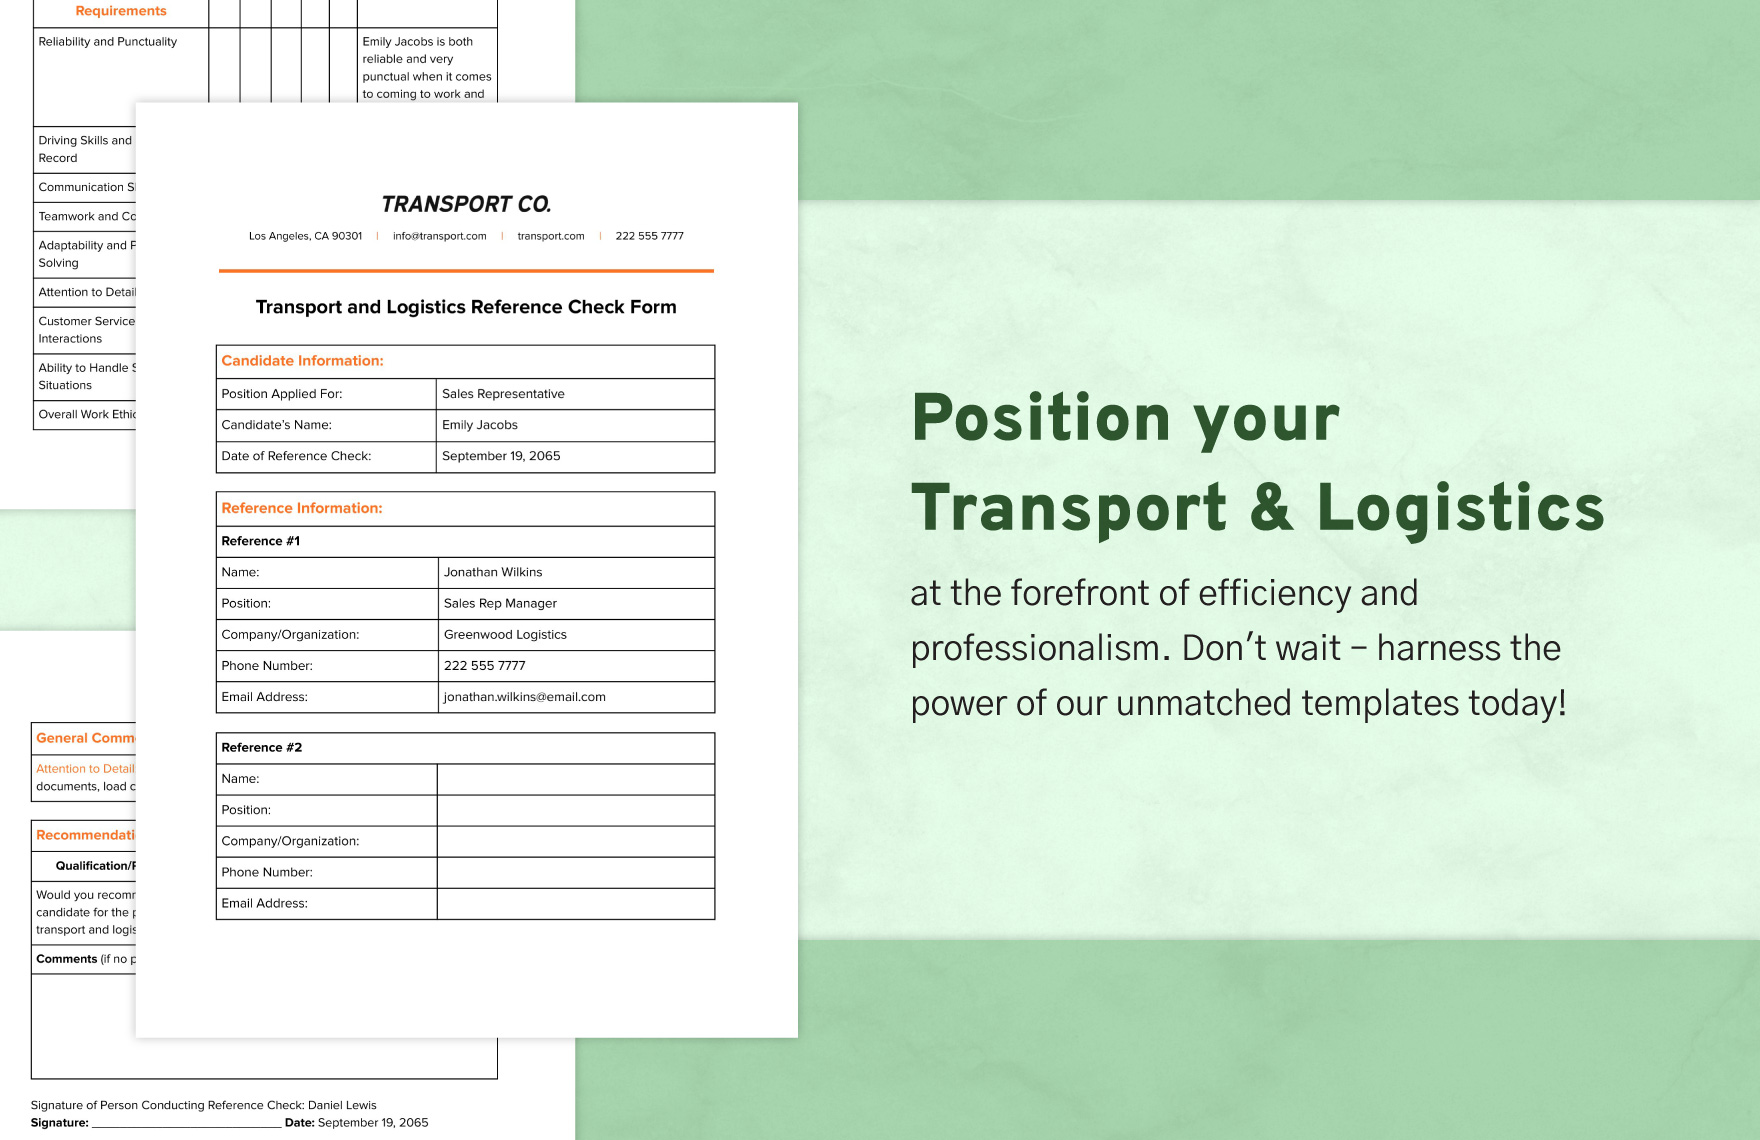 Transport and Logistics Reference Check Form Template